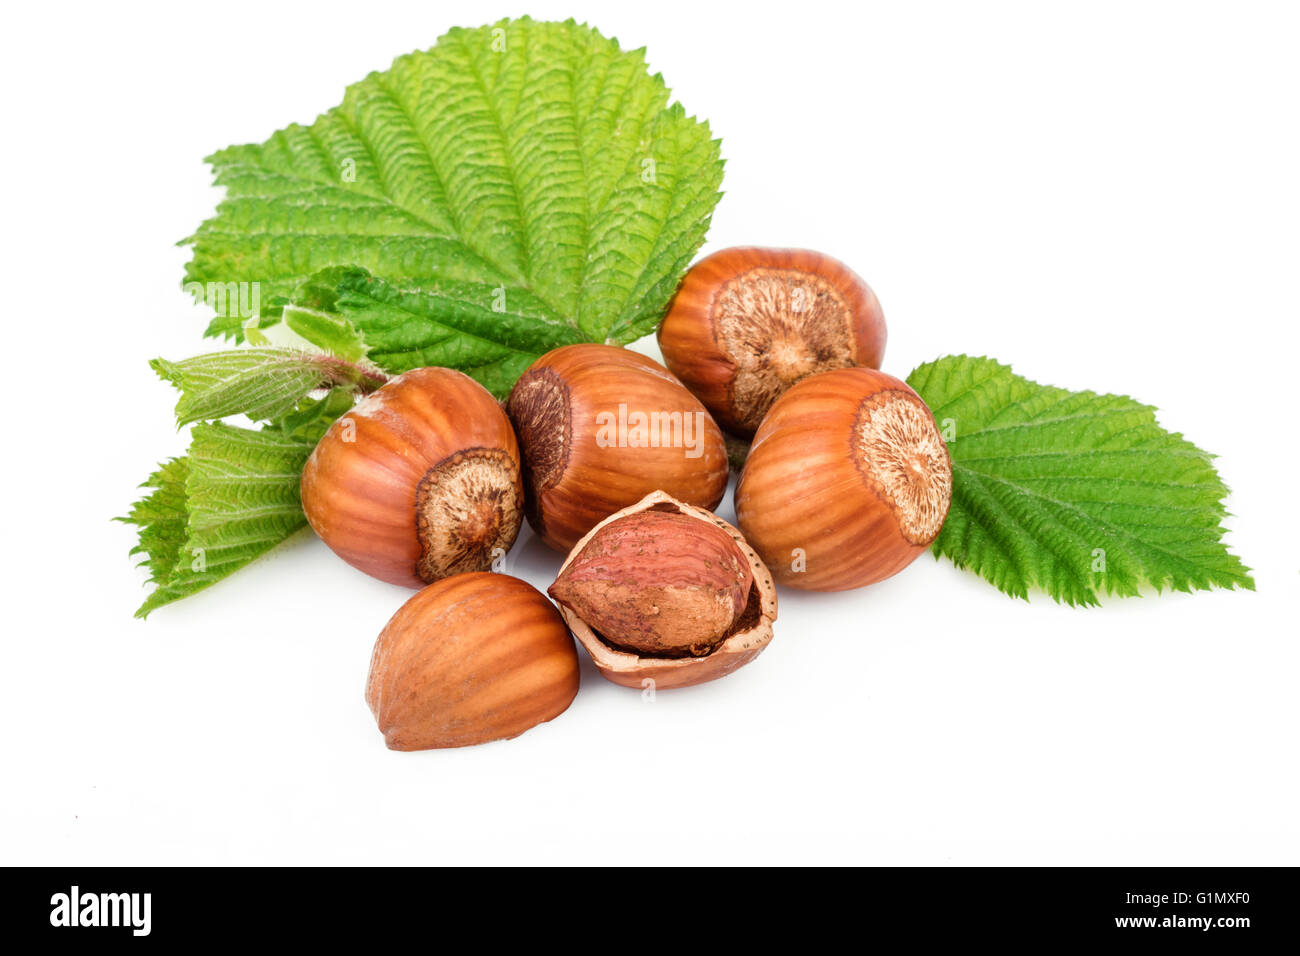 Hazelnut or filbert nuts with leaves on white background Stock Photo